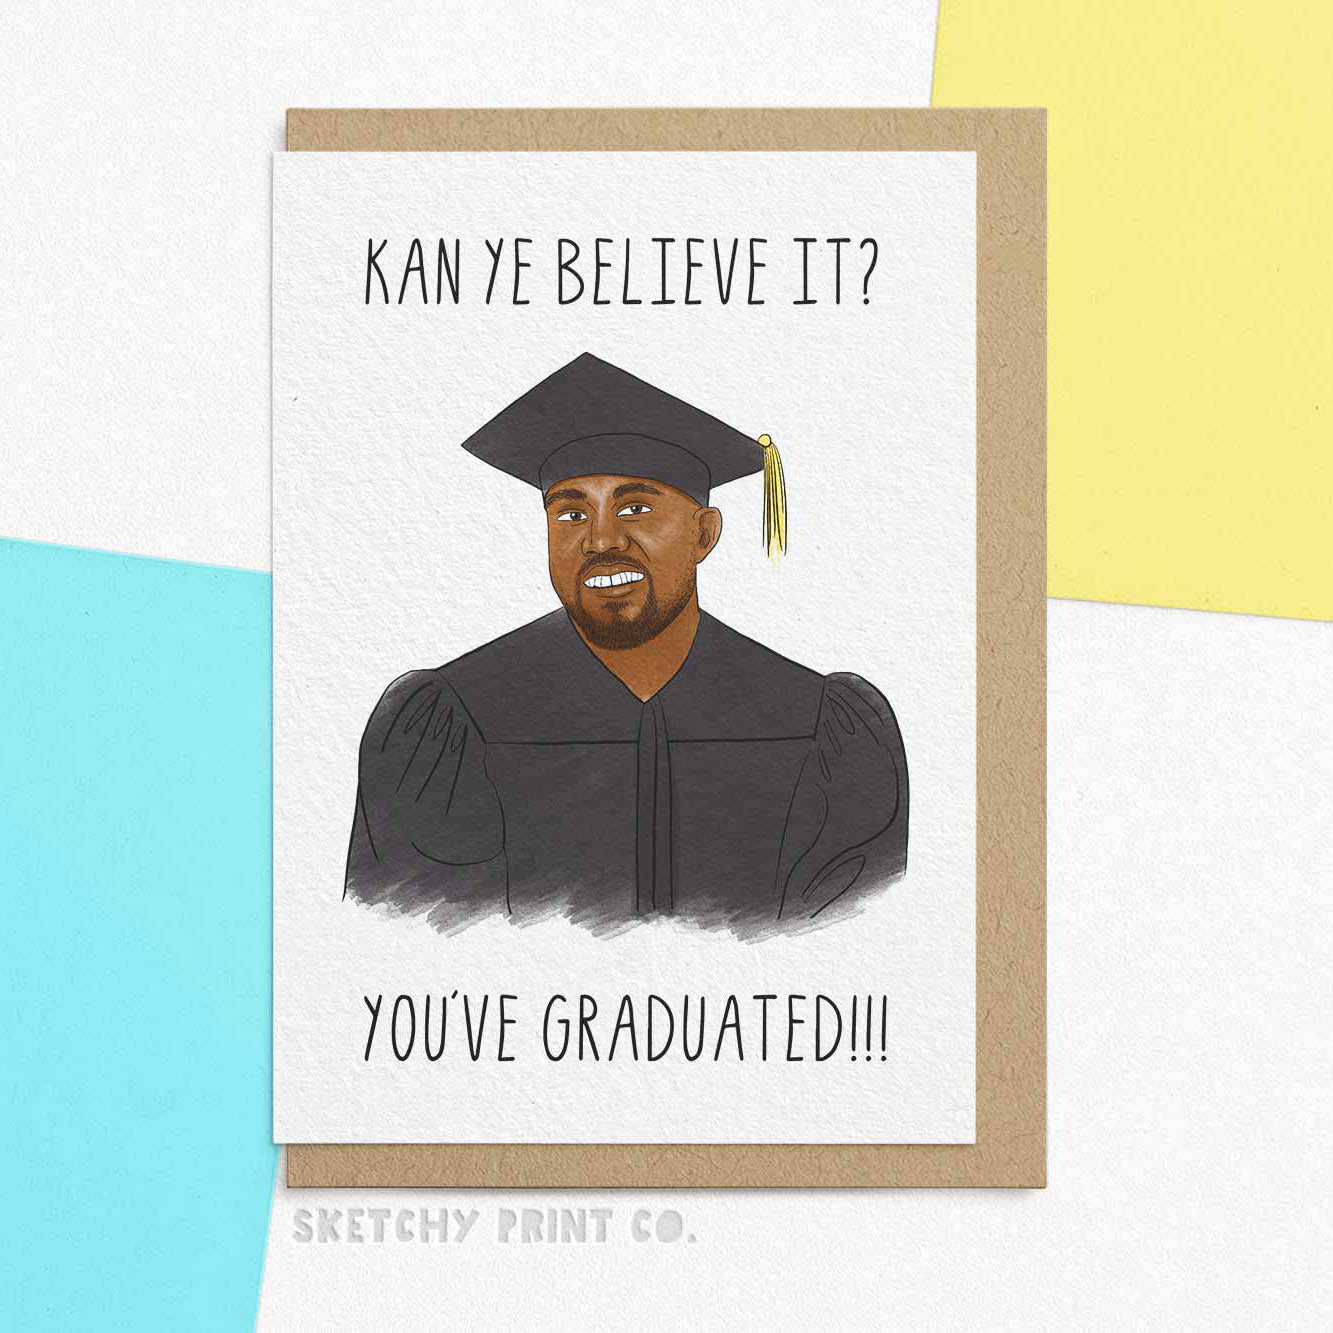 Kanye Funny Graduation Cards Exams Well Done boyfriend girlfriend unique gift unusual hilarious illustrated sketchy print co